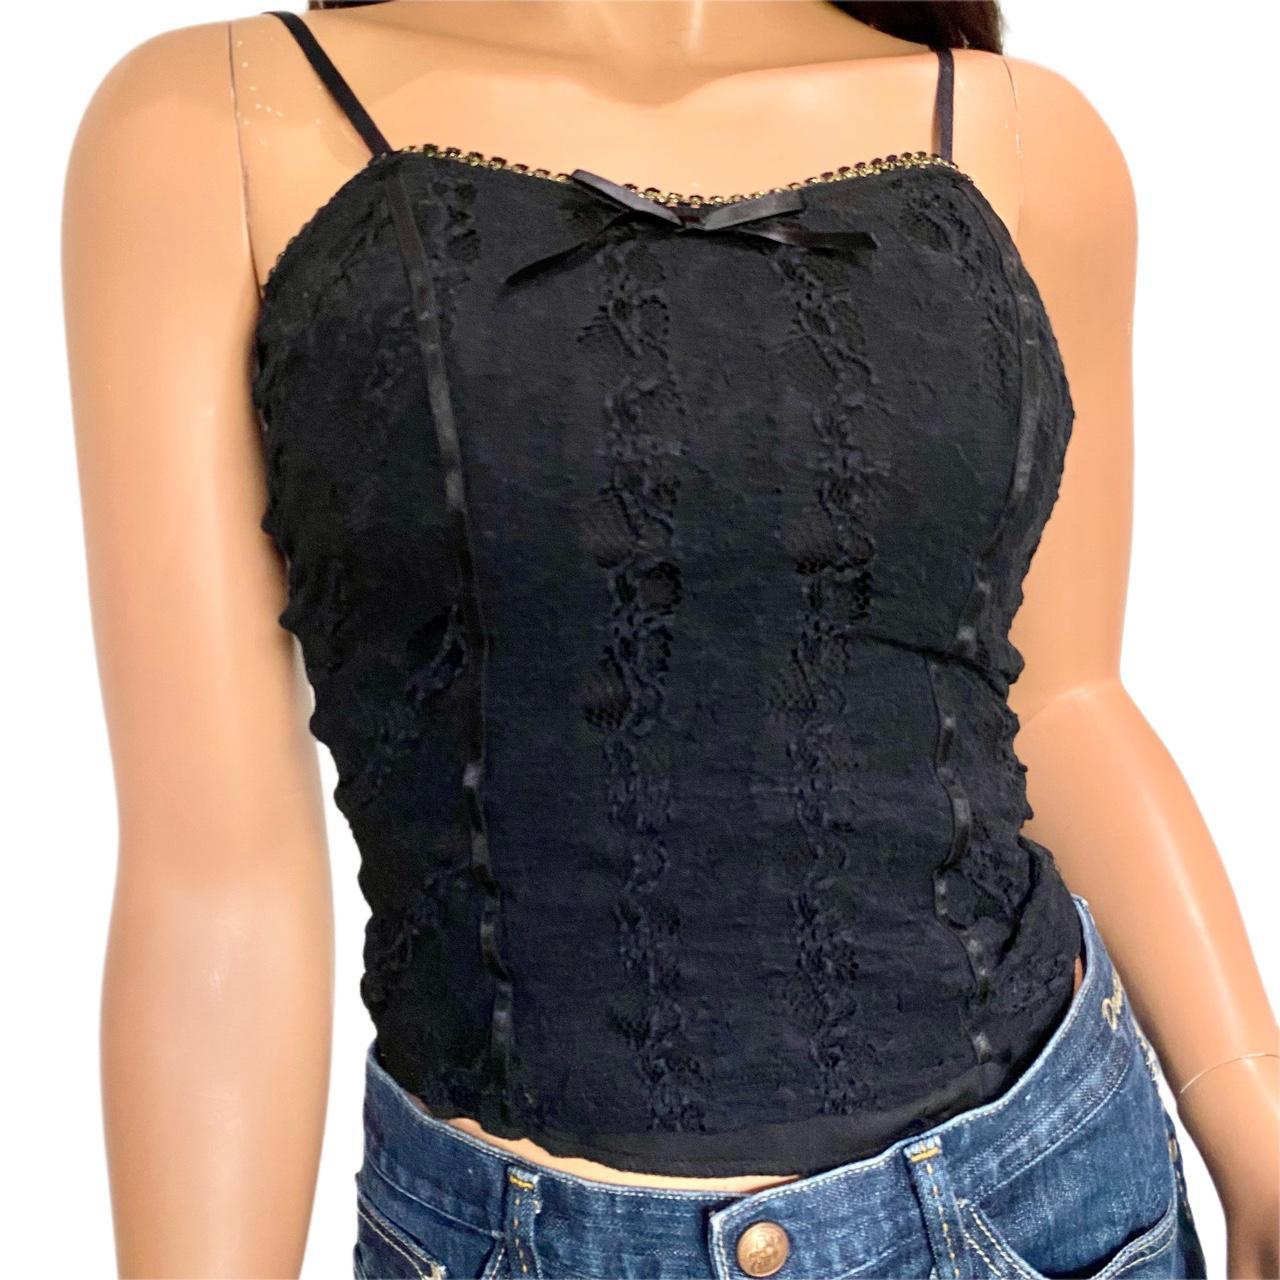 This corset top is perfect for a sexy night in or a night out.